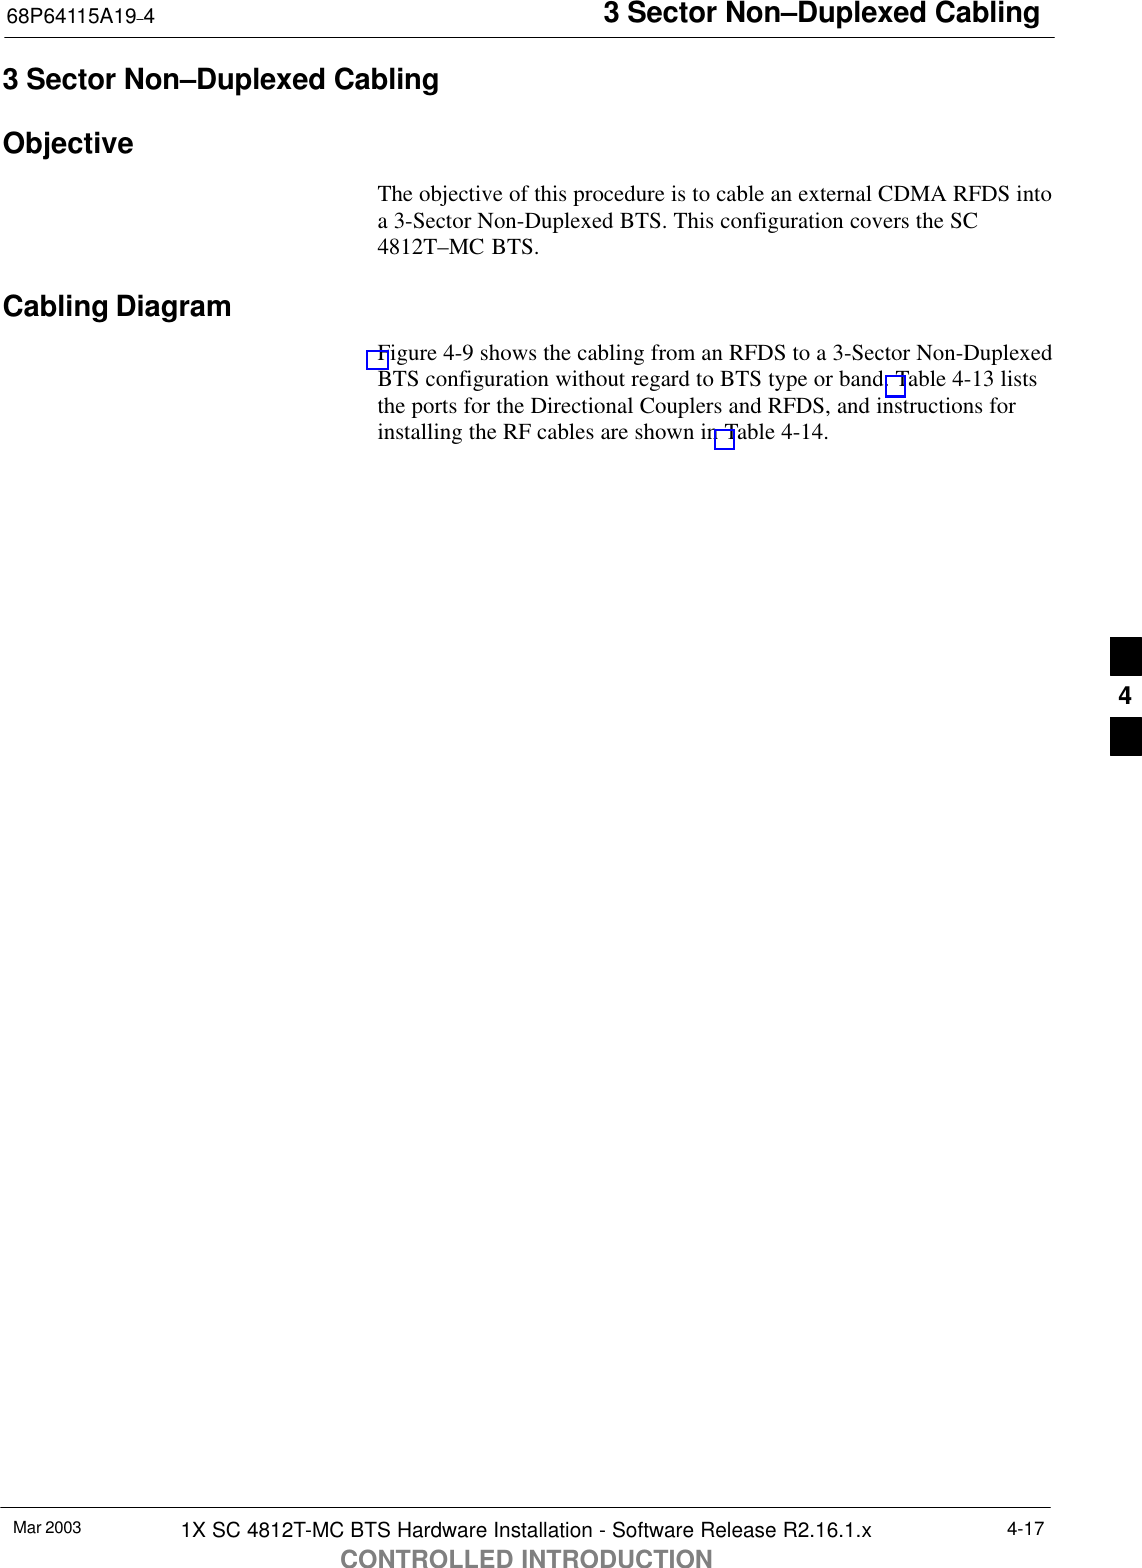 3 Sector Non–Duplexed Cabling68P64115A19–4Mar 2003 1X SC 4812T-MC BTS Hardware Installation - Software Release R2.16.1.xCONTROLLED INTRODUCTION4-173 Sector Non–Duplexed CablingObjectiveThe objective of this procedure is to cable an external CDMA RFDS intoa 3-Sector Non-Duplexed BTS. This configuration covers the SC4812T–MC BTS.Cabling DiagramFigure 4-9 shows the cabling from an RFDS to a 3-Sector Non-DuplexedBTS configuration without regard to BTS type or band. Table 4-13 liststhe ports for the Directional Couplers and RFDS, and instructions forinstalling the RF cables are shown in Table 4-14.4